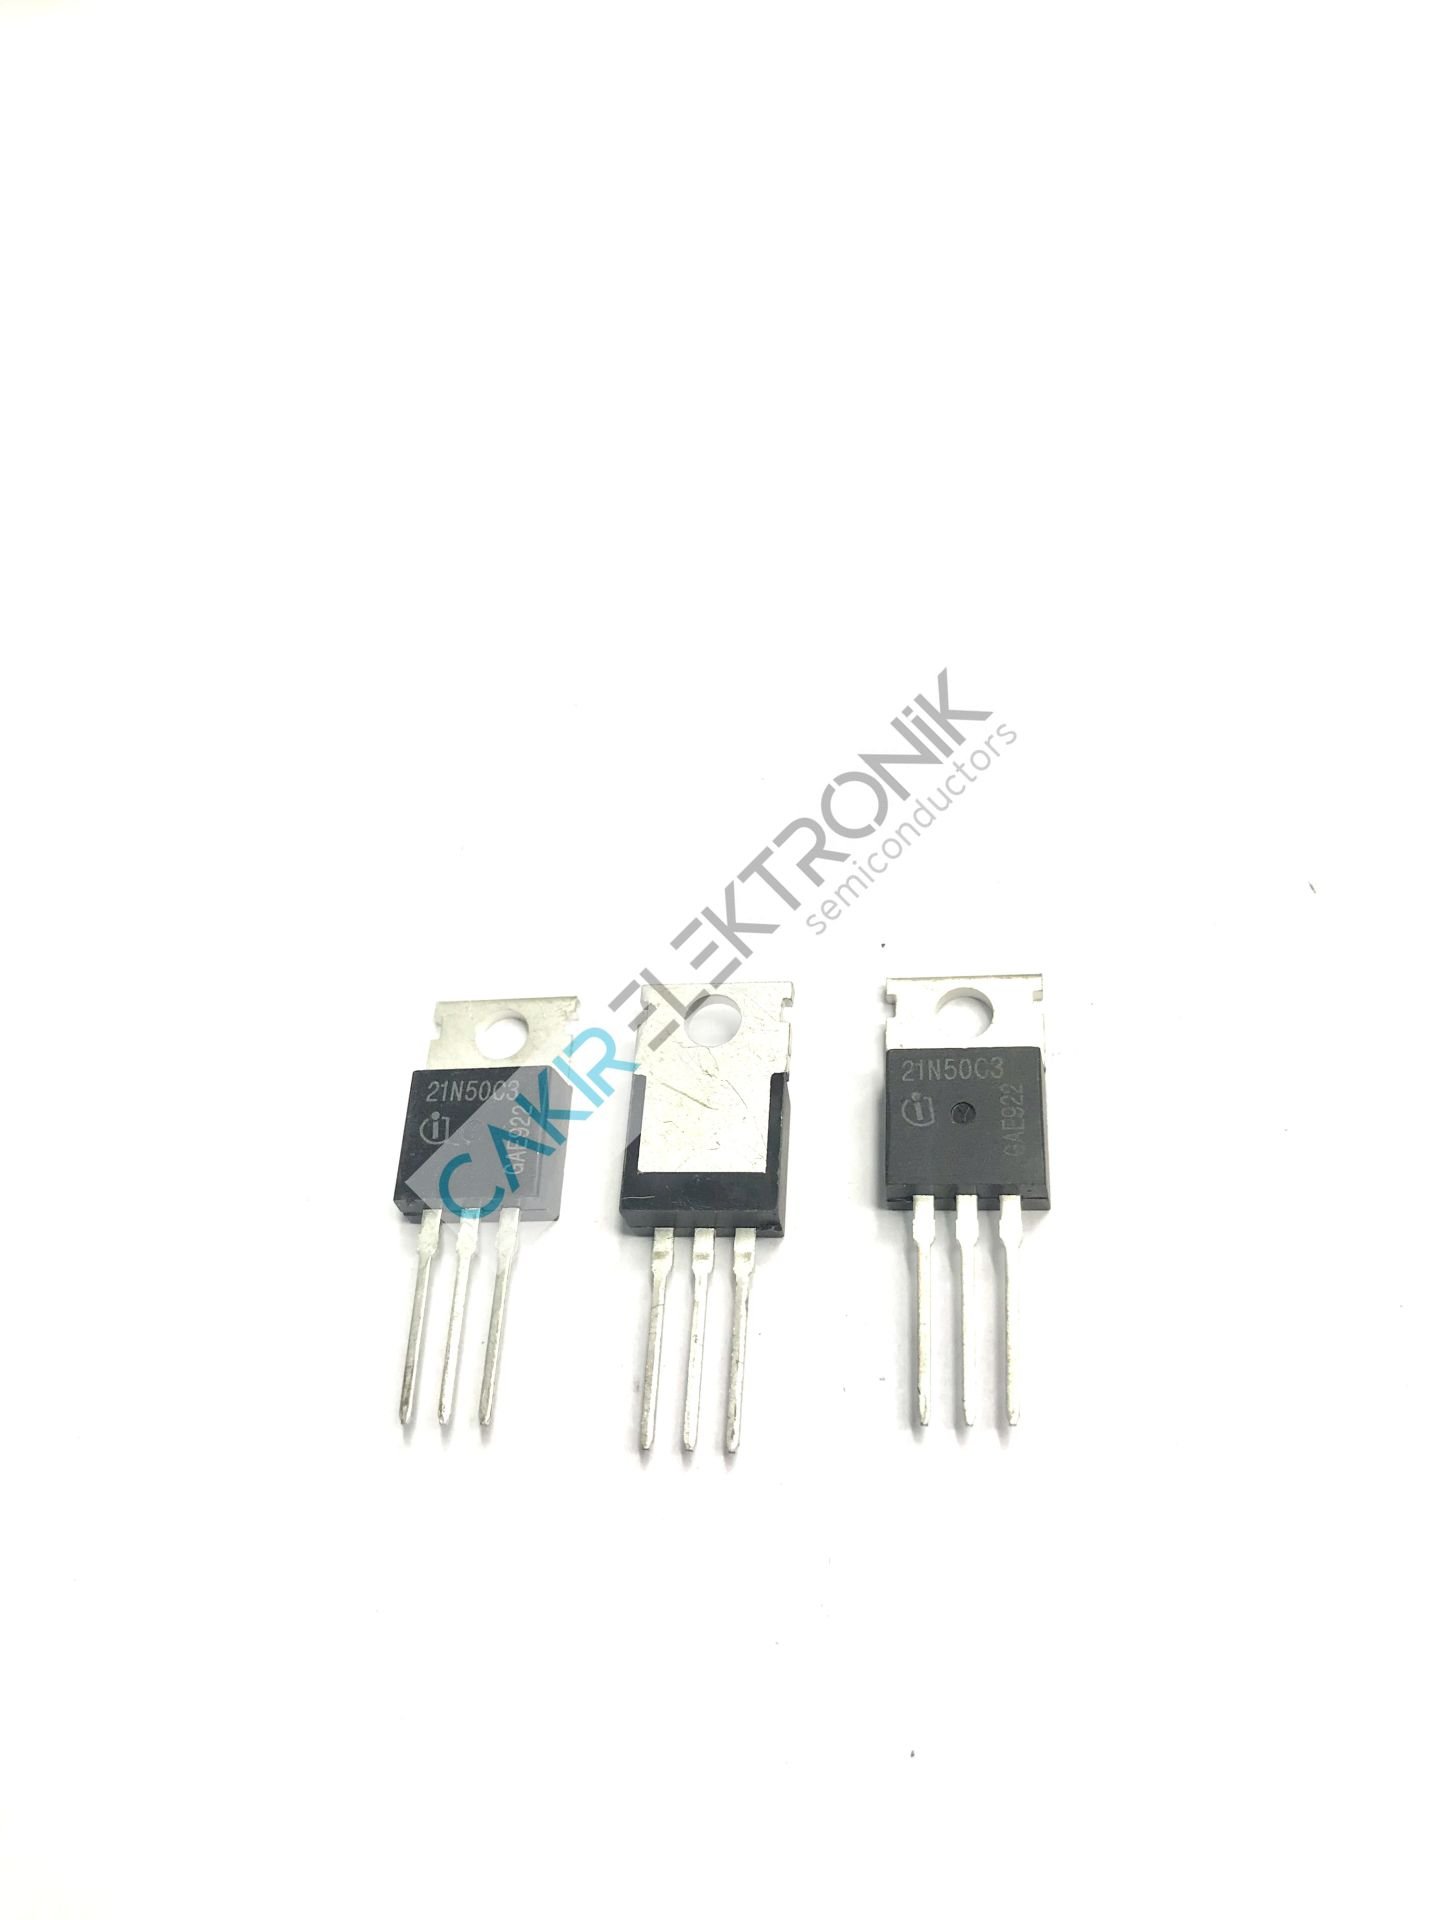 SPP21N50C3 - 21N50C3  N-Channel 560 V 21A (Tc) 208W (Tc) Through Hole PG-TO220-3-1